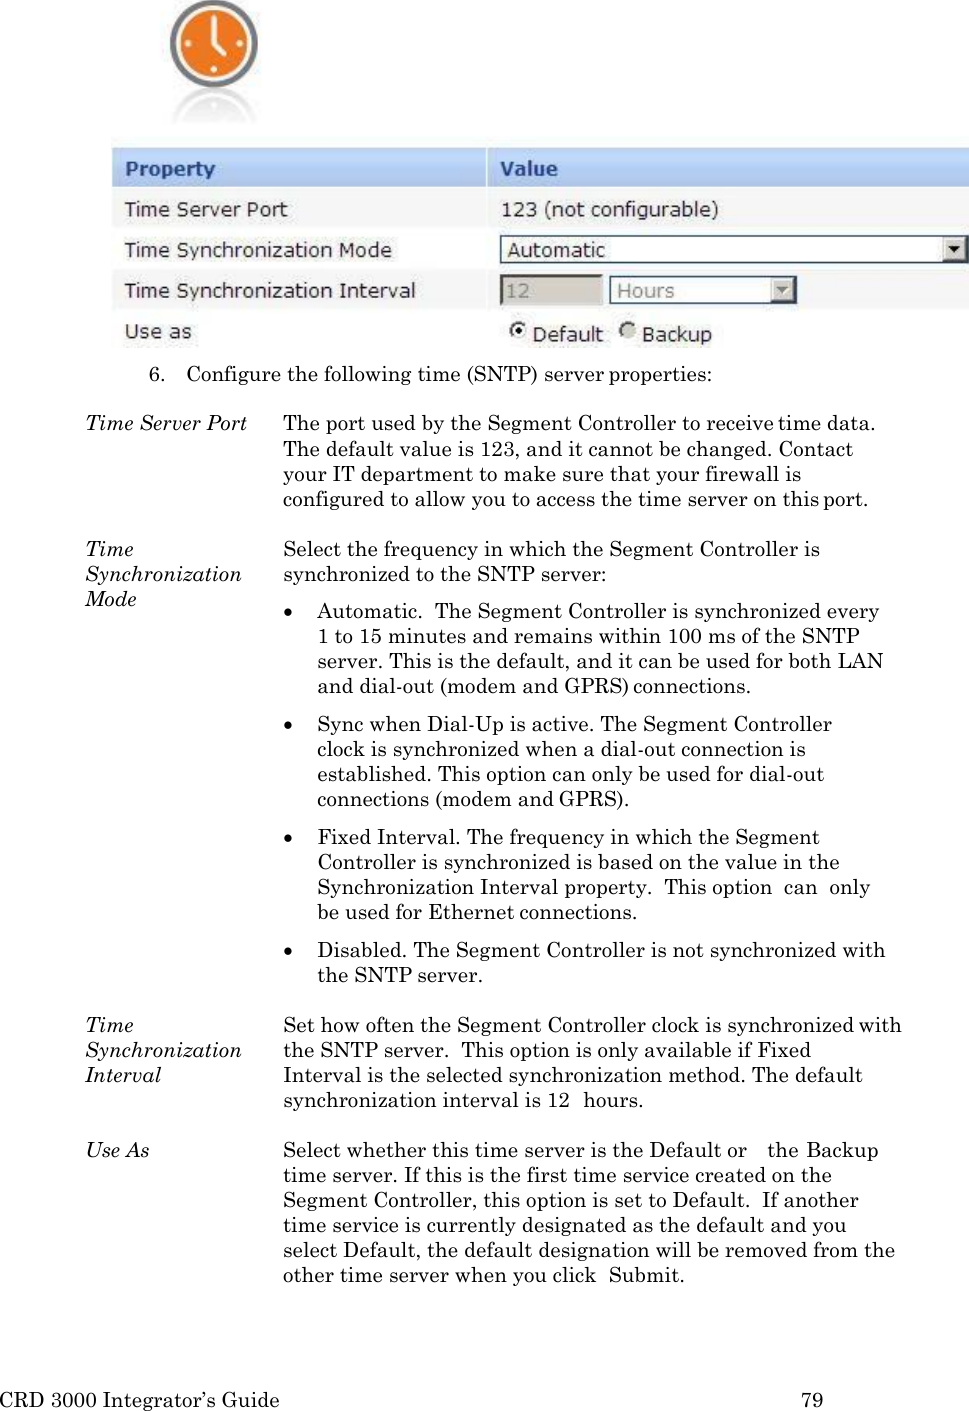 CRD 3000 Integrator’s Guide 79   6. Configure the following time (SNTP) server properties:  Time Server Port  The port used by the Segment Controller to receive time data. The default value is 123, and it cannot be changed. Contact your IT department to make sure that your firewall is configured to allow you to access the time server on this port.  Time Synchronization Mode Select the frequency in which the Segment Controller is synchronized to the SNTP server:  Automatic.  The Segment Controller is synchronized every 1 to 15 minutes and remains within 100 ms of the SNTP server. This is the default, and it can be used for both LAN and dial-out (modem and GPRS) connections.  Sync when Dial-Up is active. The Segment Controller clock is synchronized when a dial-out connection is established. This option can only be used for dial-out connections (modem and GPRS).  Fixed Interval. The frequency in which the Segment Controller is synchronized is based on the value in the Synchronization Interval property.  This option  can  only be used for Ethernet connections.  Disabled. The Segment Controller is not synchronized with the SNTP server.  Time Synchronization Interval Set how often the Segment Controller clock is synchronized with the SNTP server.  This option is only available if Fixed   Interval is the selected synchronization method. The default synchronization interval is 12  hours.  Use As Select whether this time server is the Default or    the Backup time server. If this is the first time service created on the Segment Controller, this option is set to Default.  If another time service is currently designated as the default and you select Default, the default designation will be removed from the other time server when you click  Submit. 